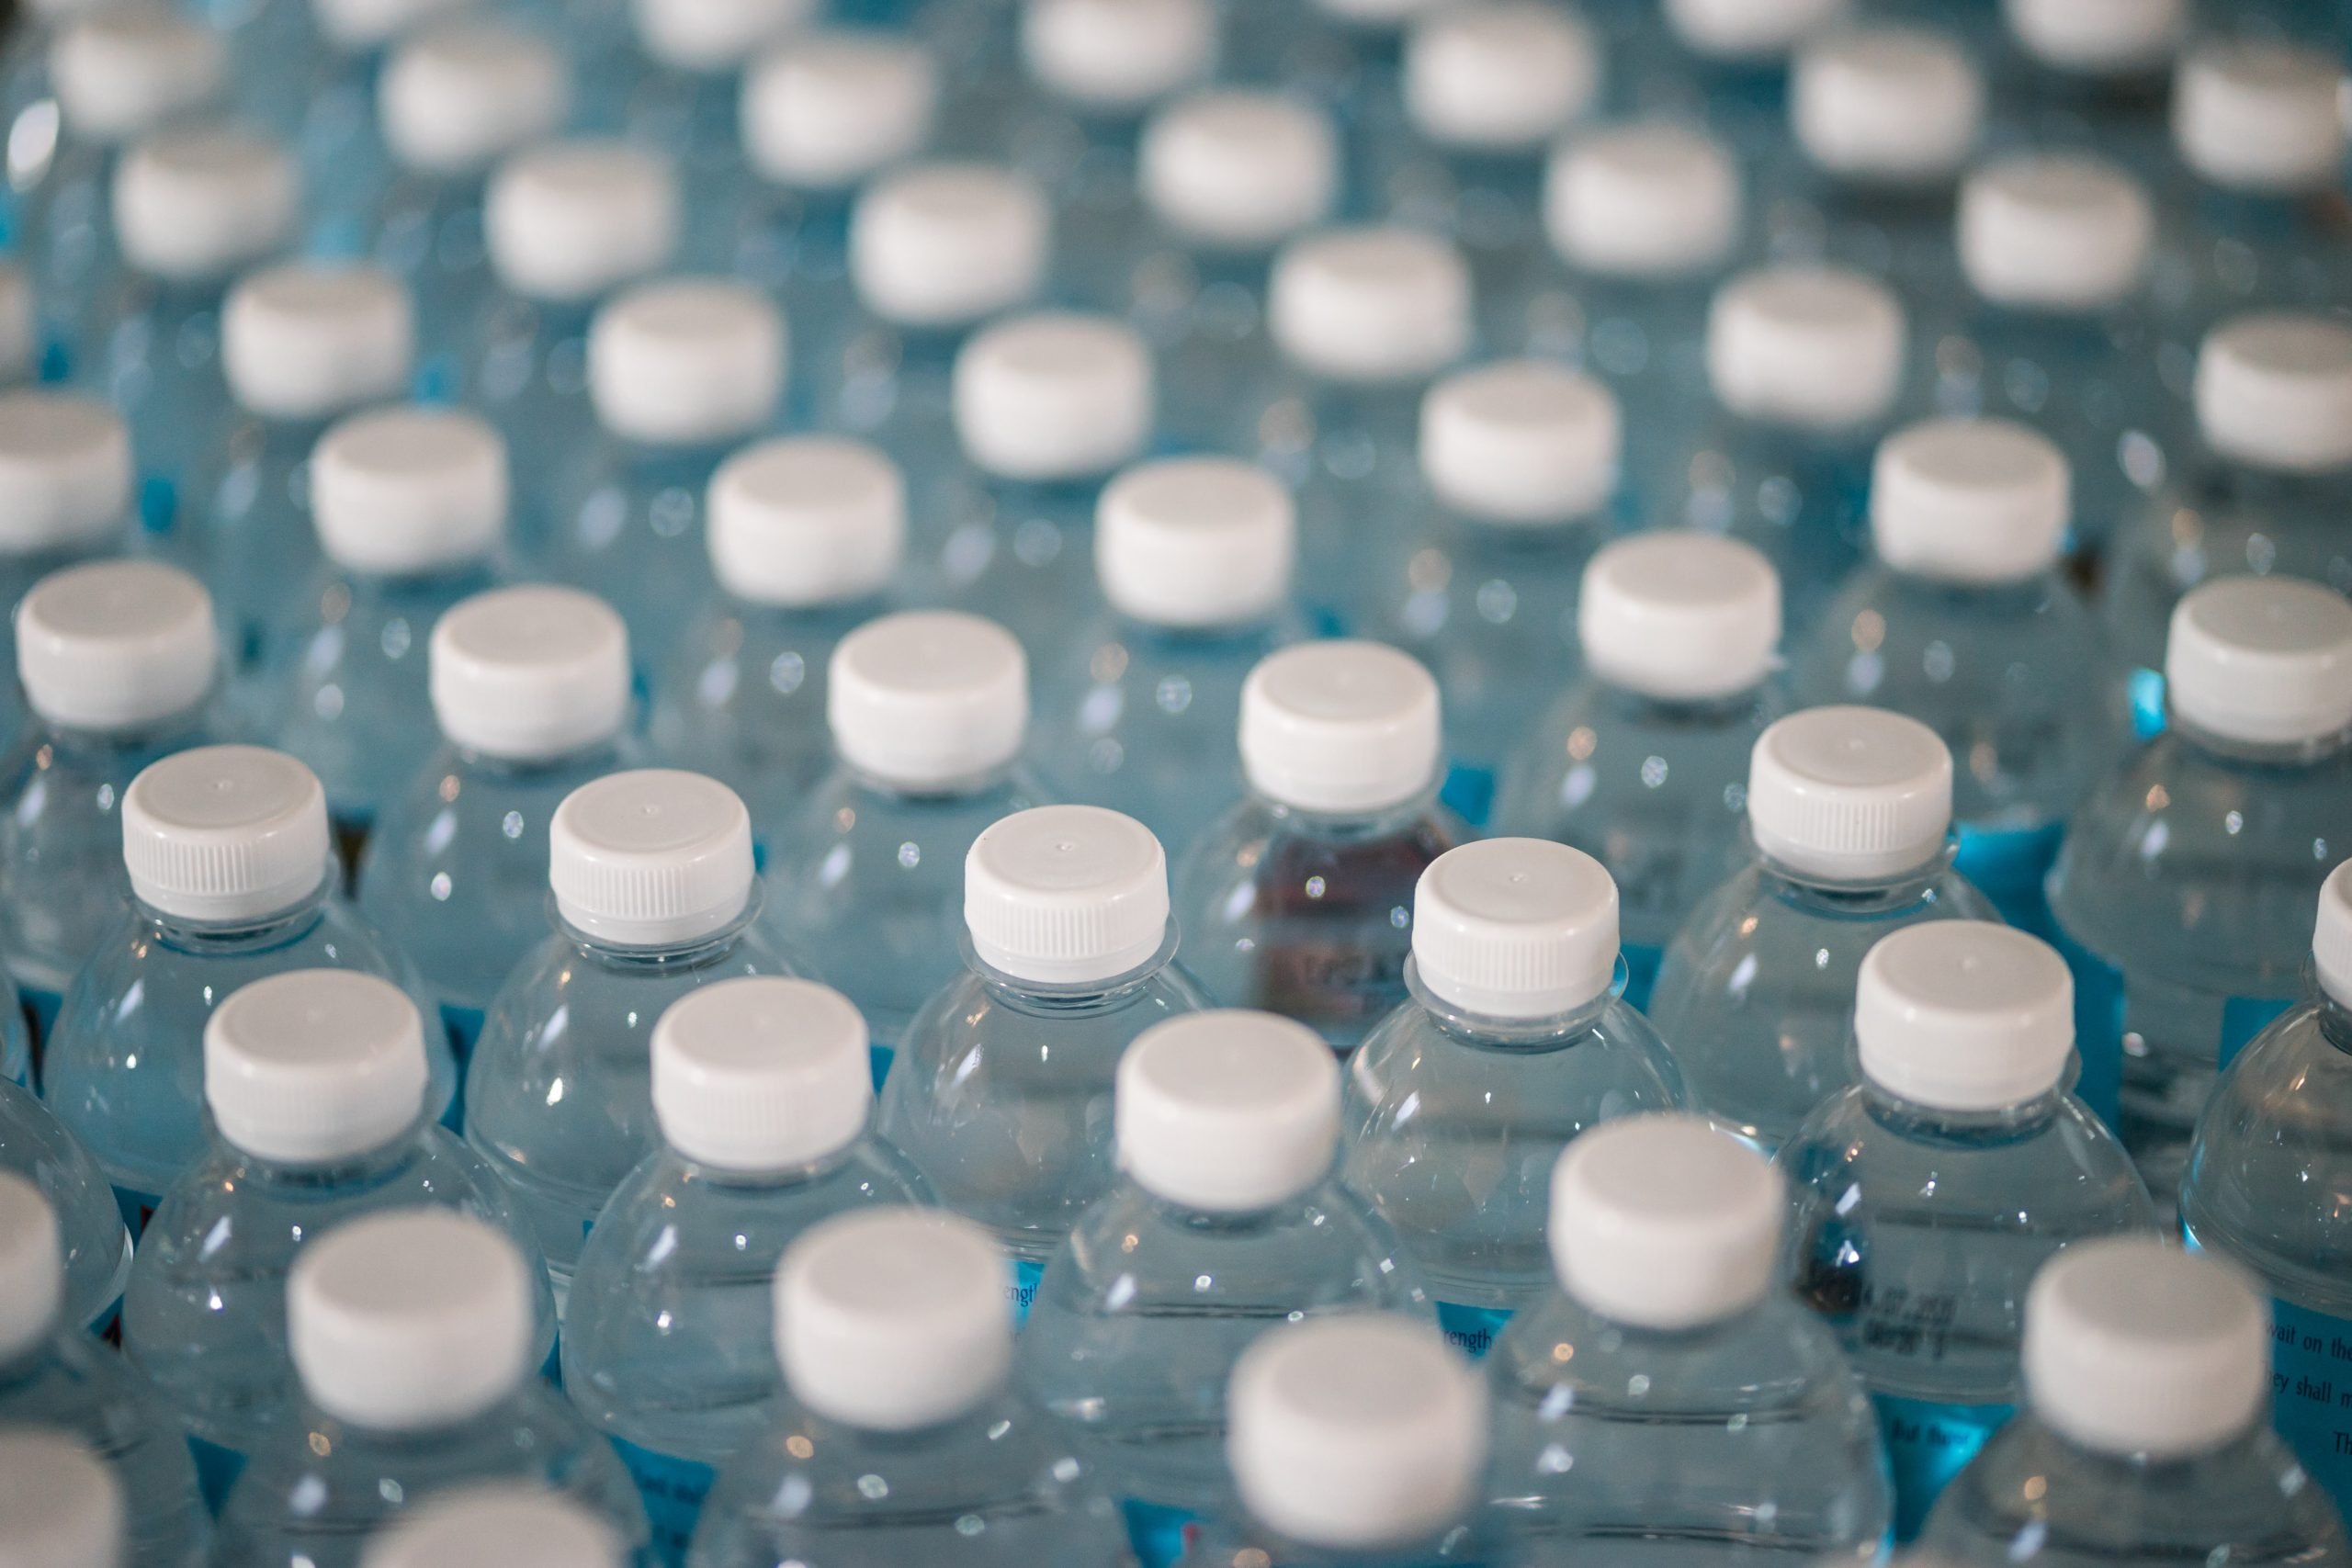 Is bottled water safe to drink? Hot plastic may leach chemicals, experts say